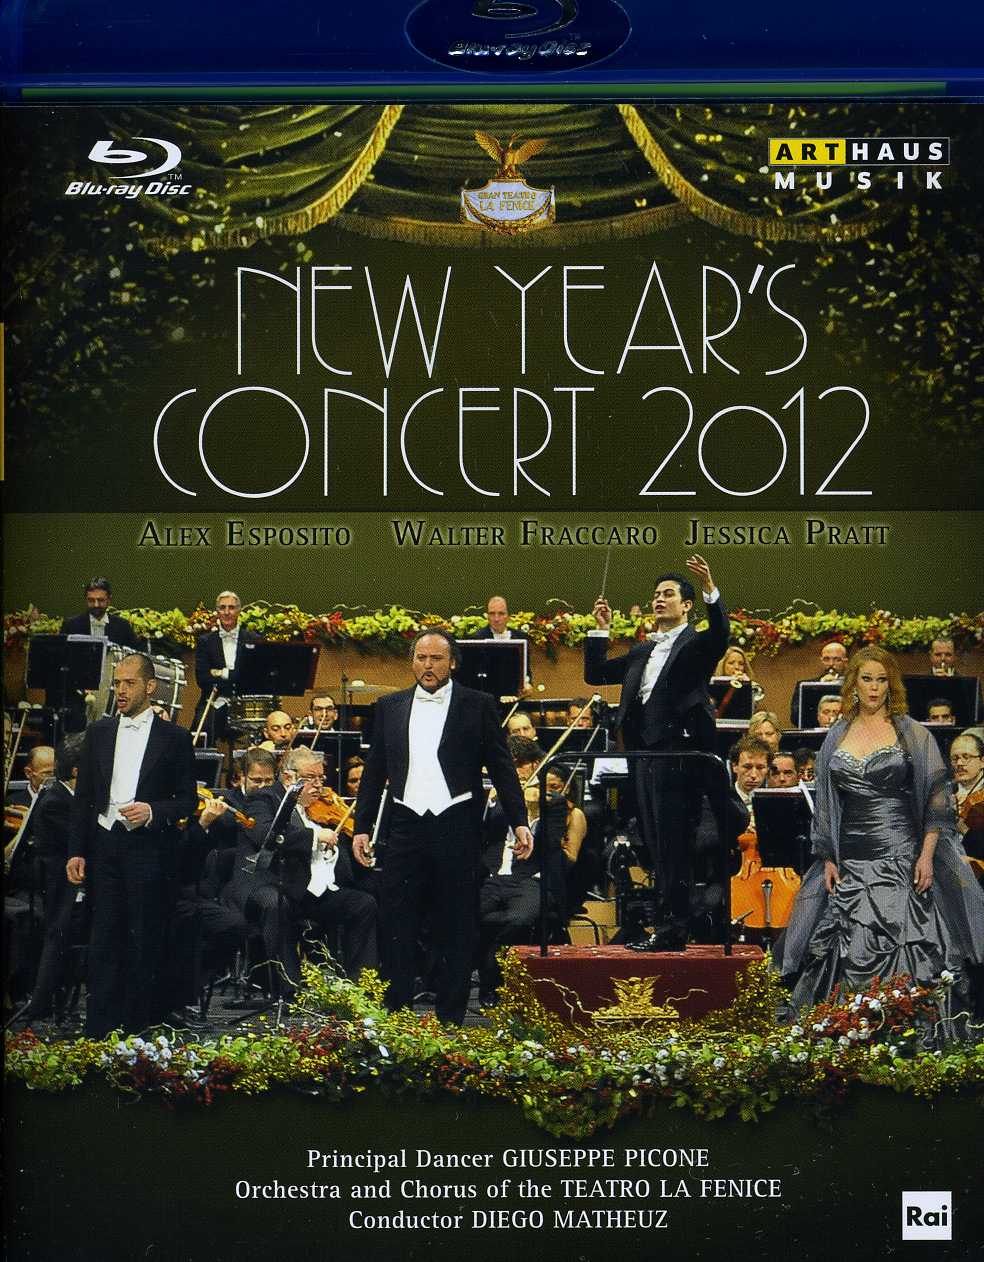 NEW YEAR'S CONCERT 2012